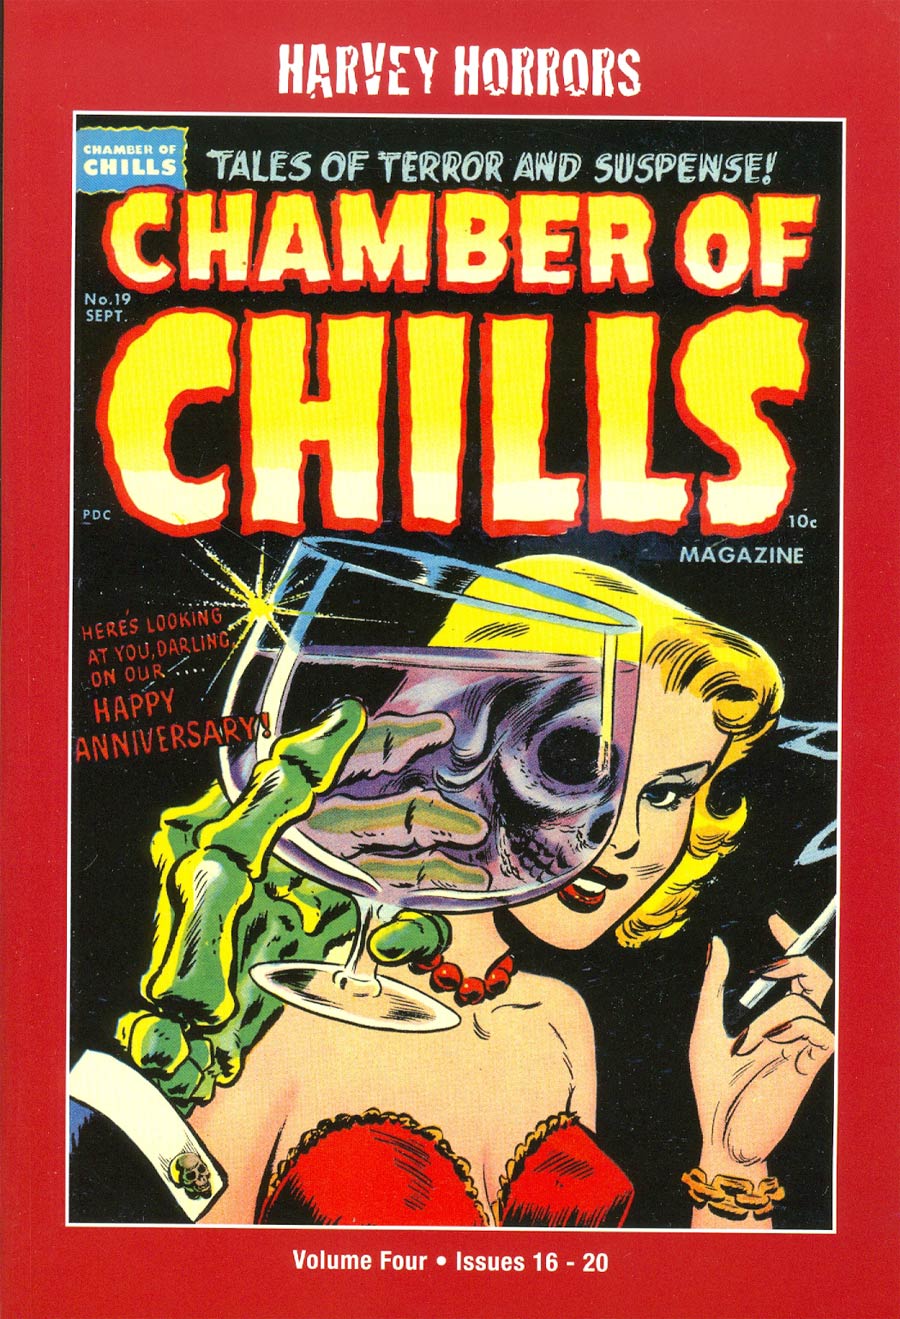 Harvey Horrors Collected Works Chamber Of Chills Softie Vol 4 TP